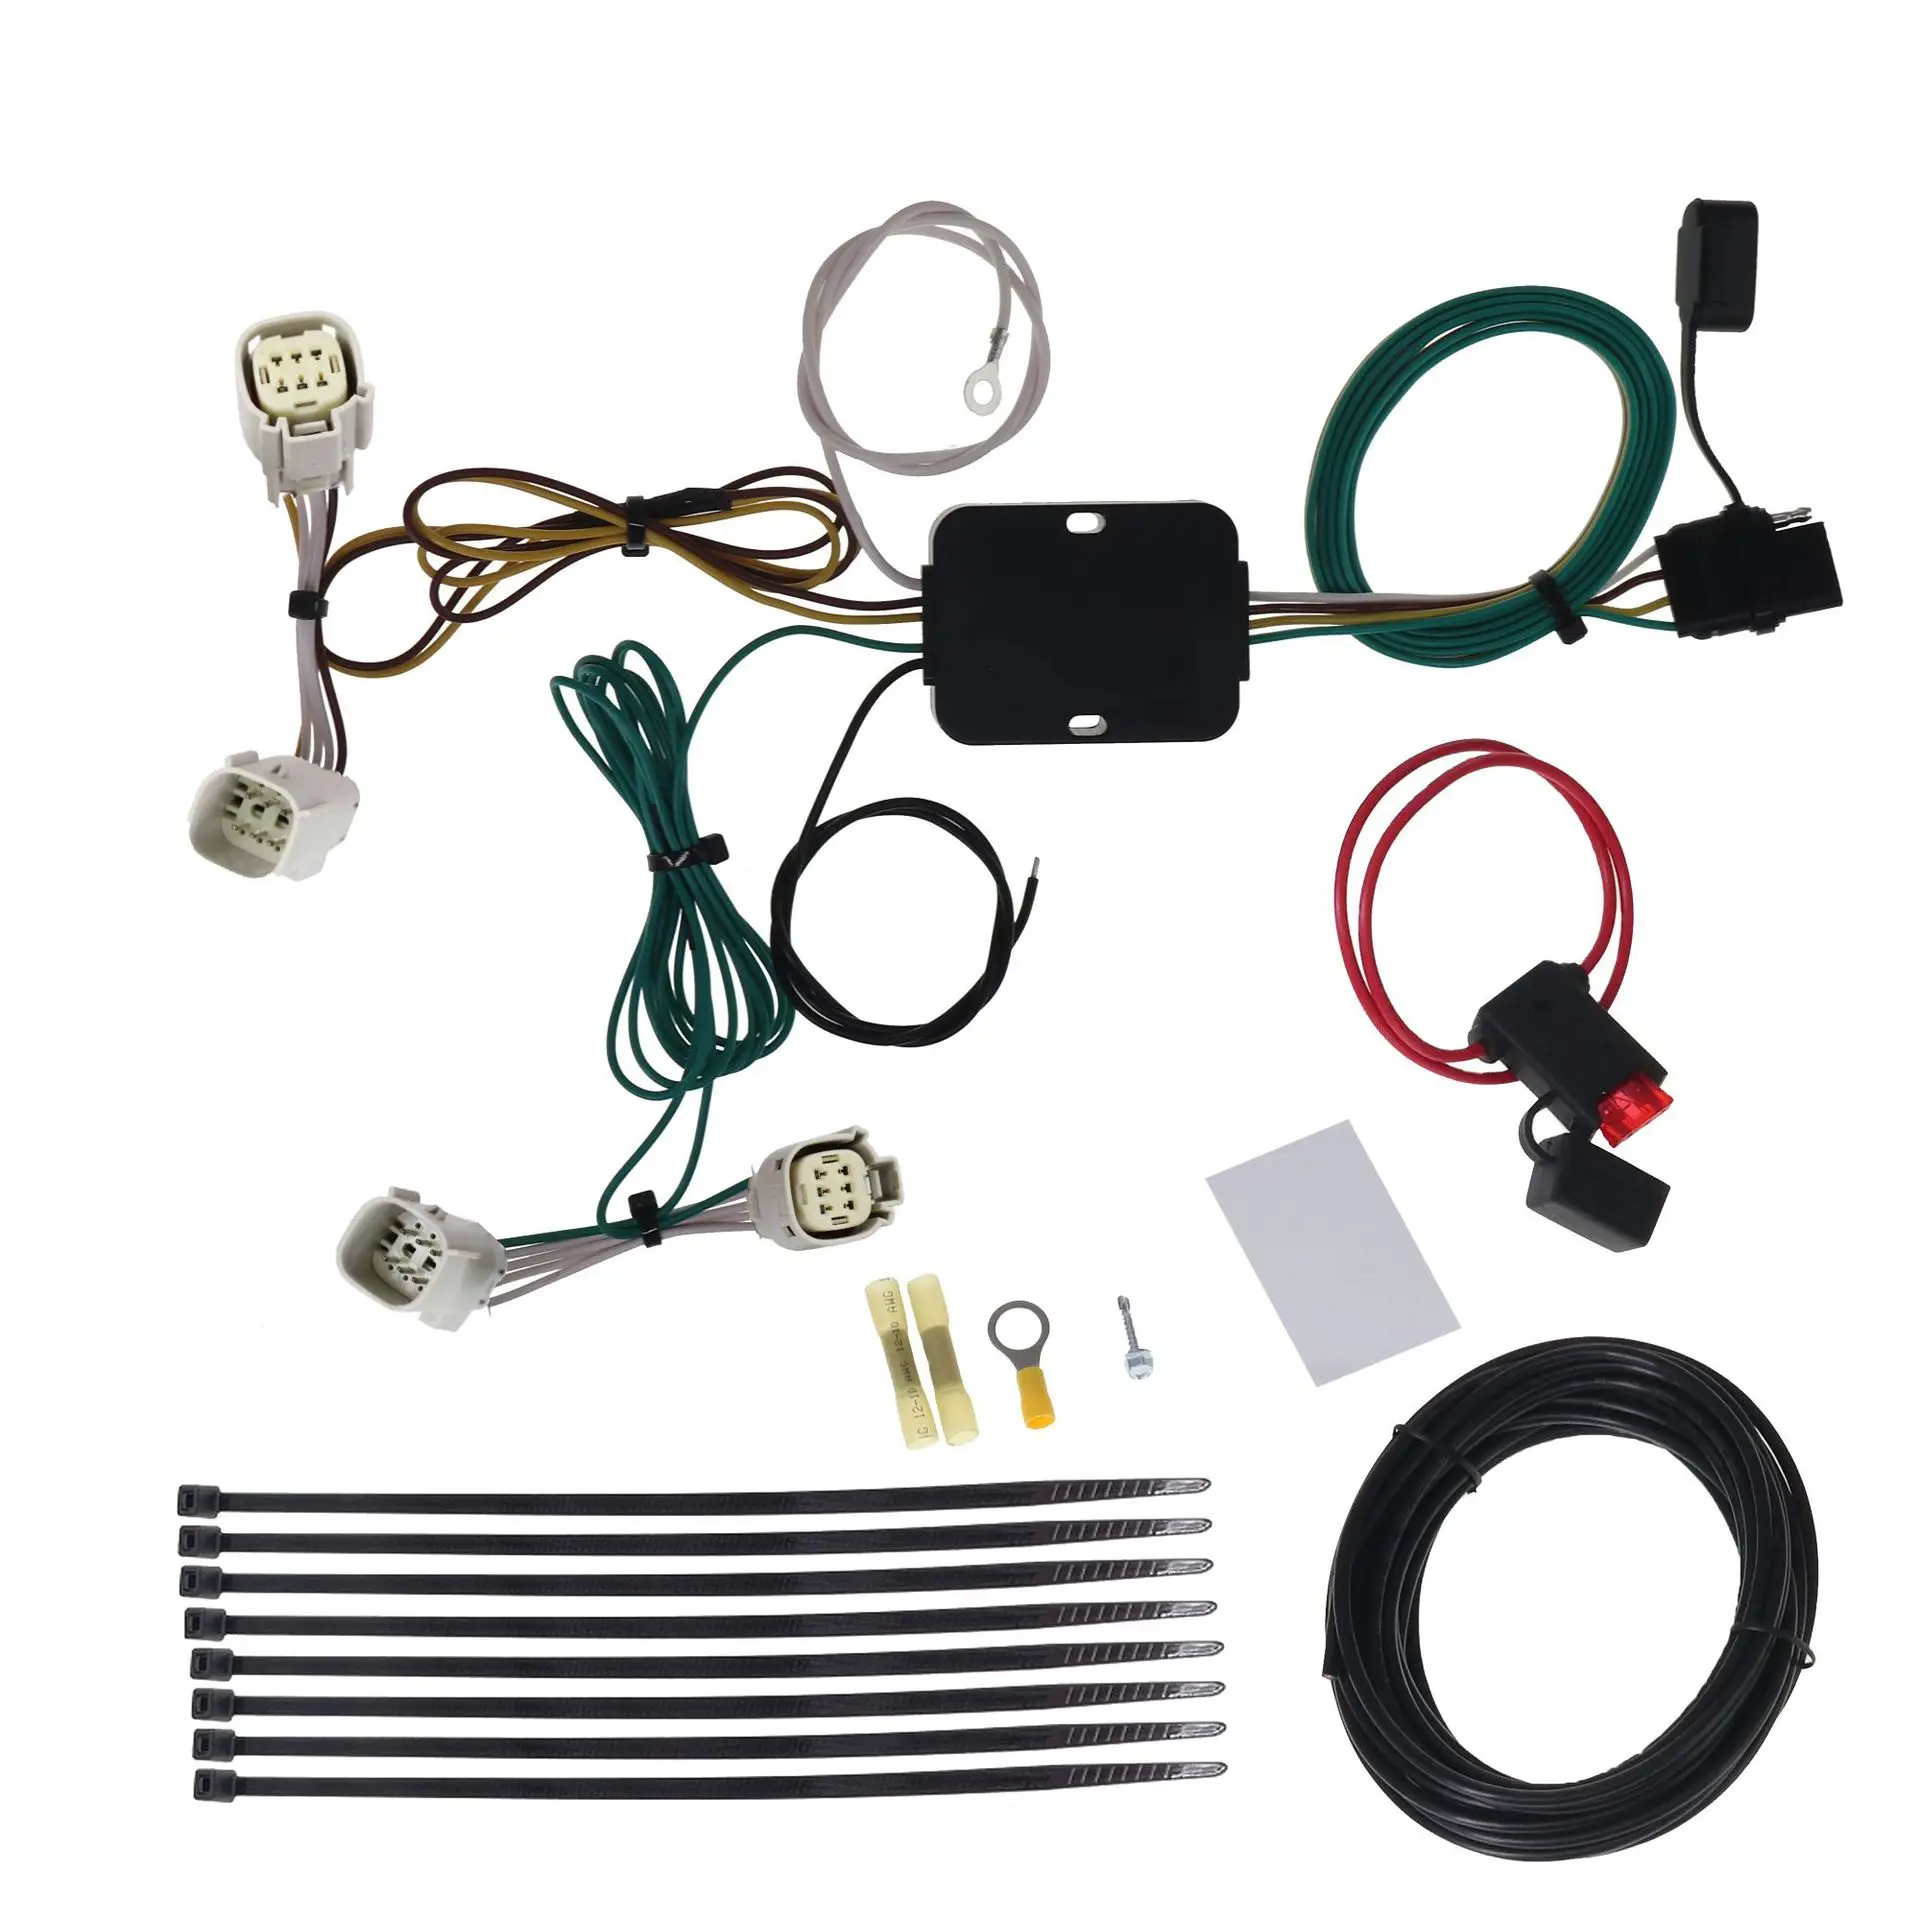 Car wire harness trailer connector  Trailer accessories 4-core power converter 21-23Bronco Without LED taillights 56471 118867 fashion leather chain belt women punk gothic harness waist metal chain body bondage wide corset wasitband rock accessories